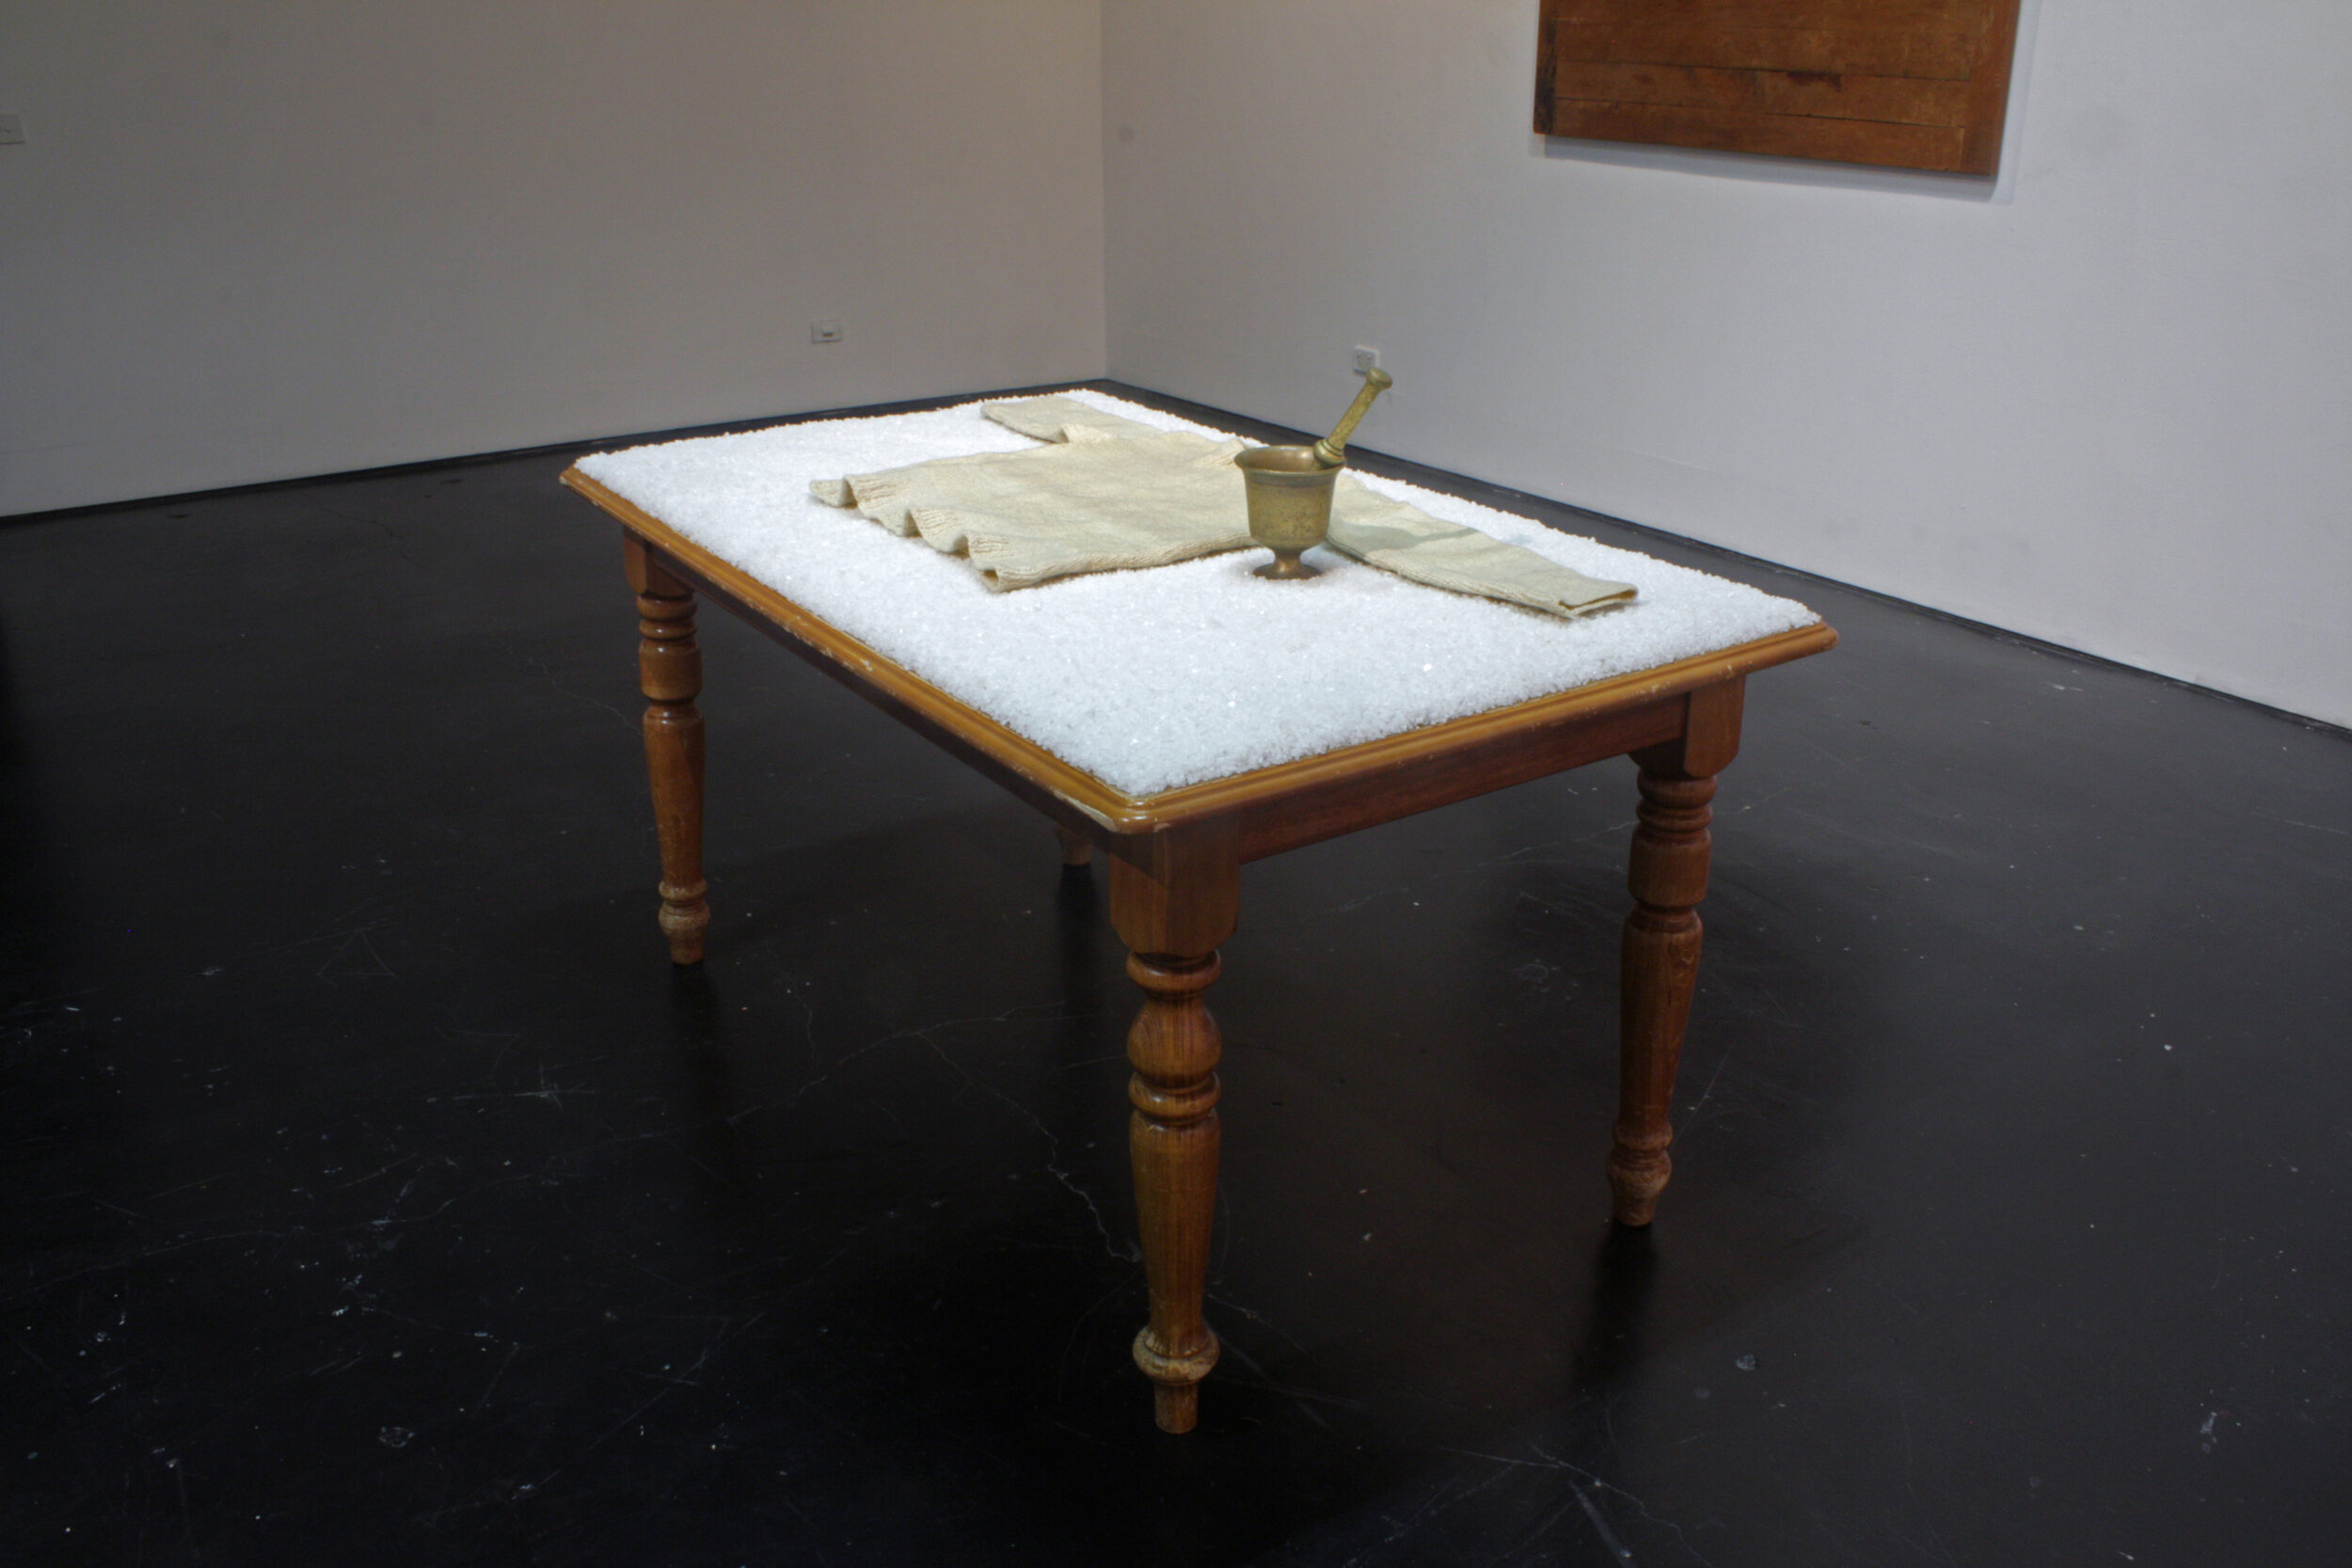    My sister’s table, my father’s garment, my mother’s mortar and pestle   ,  2013  Material: wooden table, granular salt, woolen handknitted garment, brass mortar and pestle. Presence: artist’s mother, father, sister, islands. 